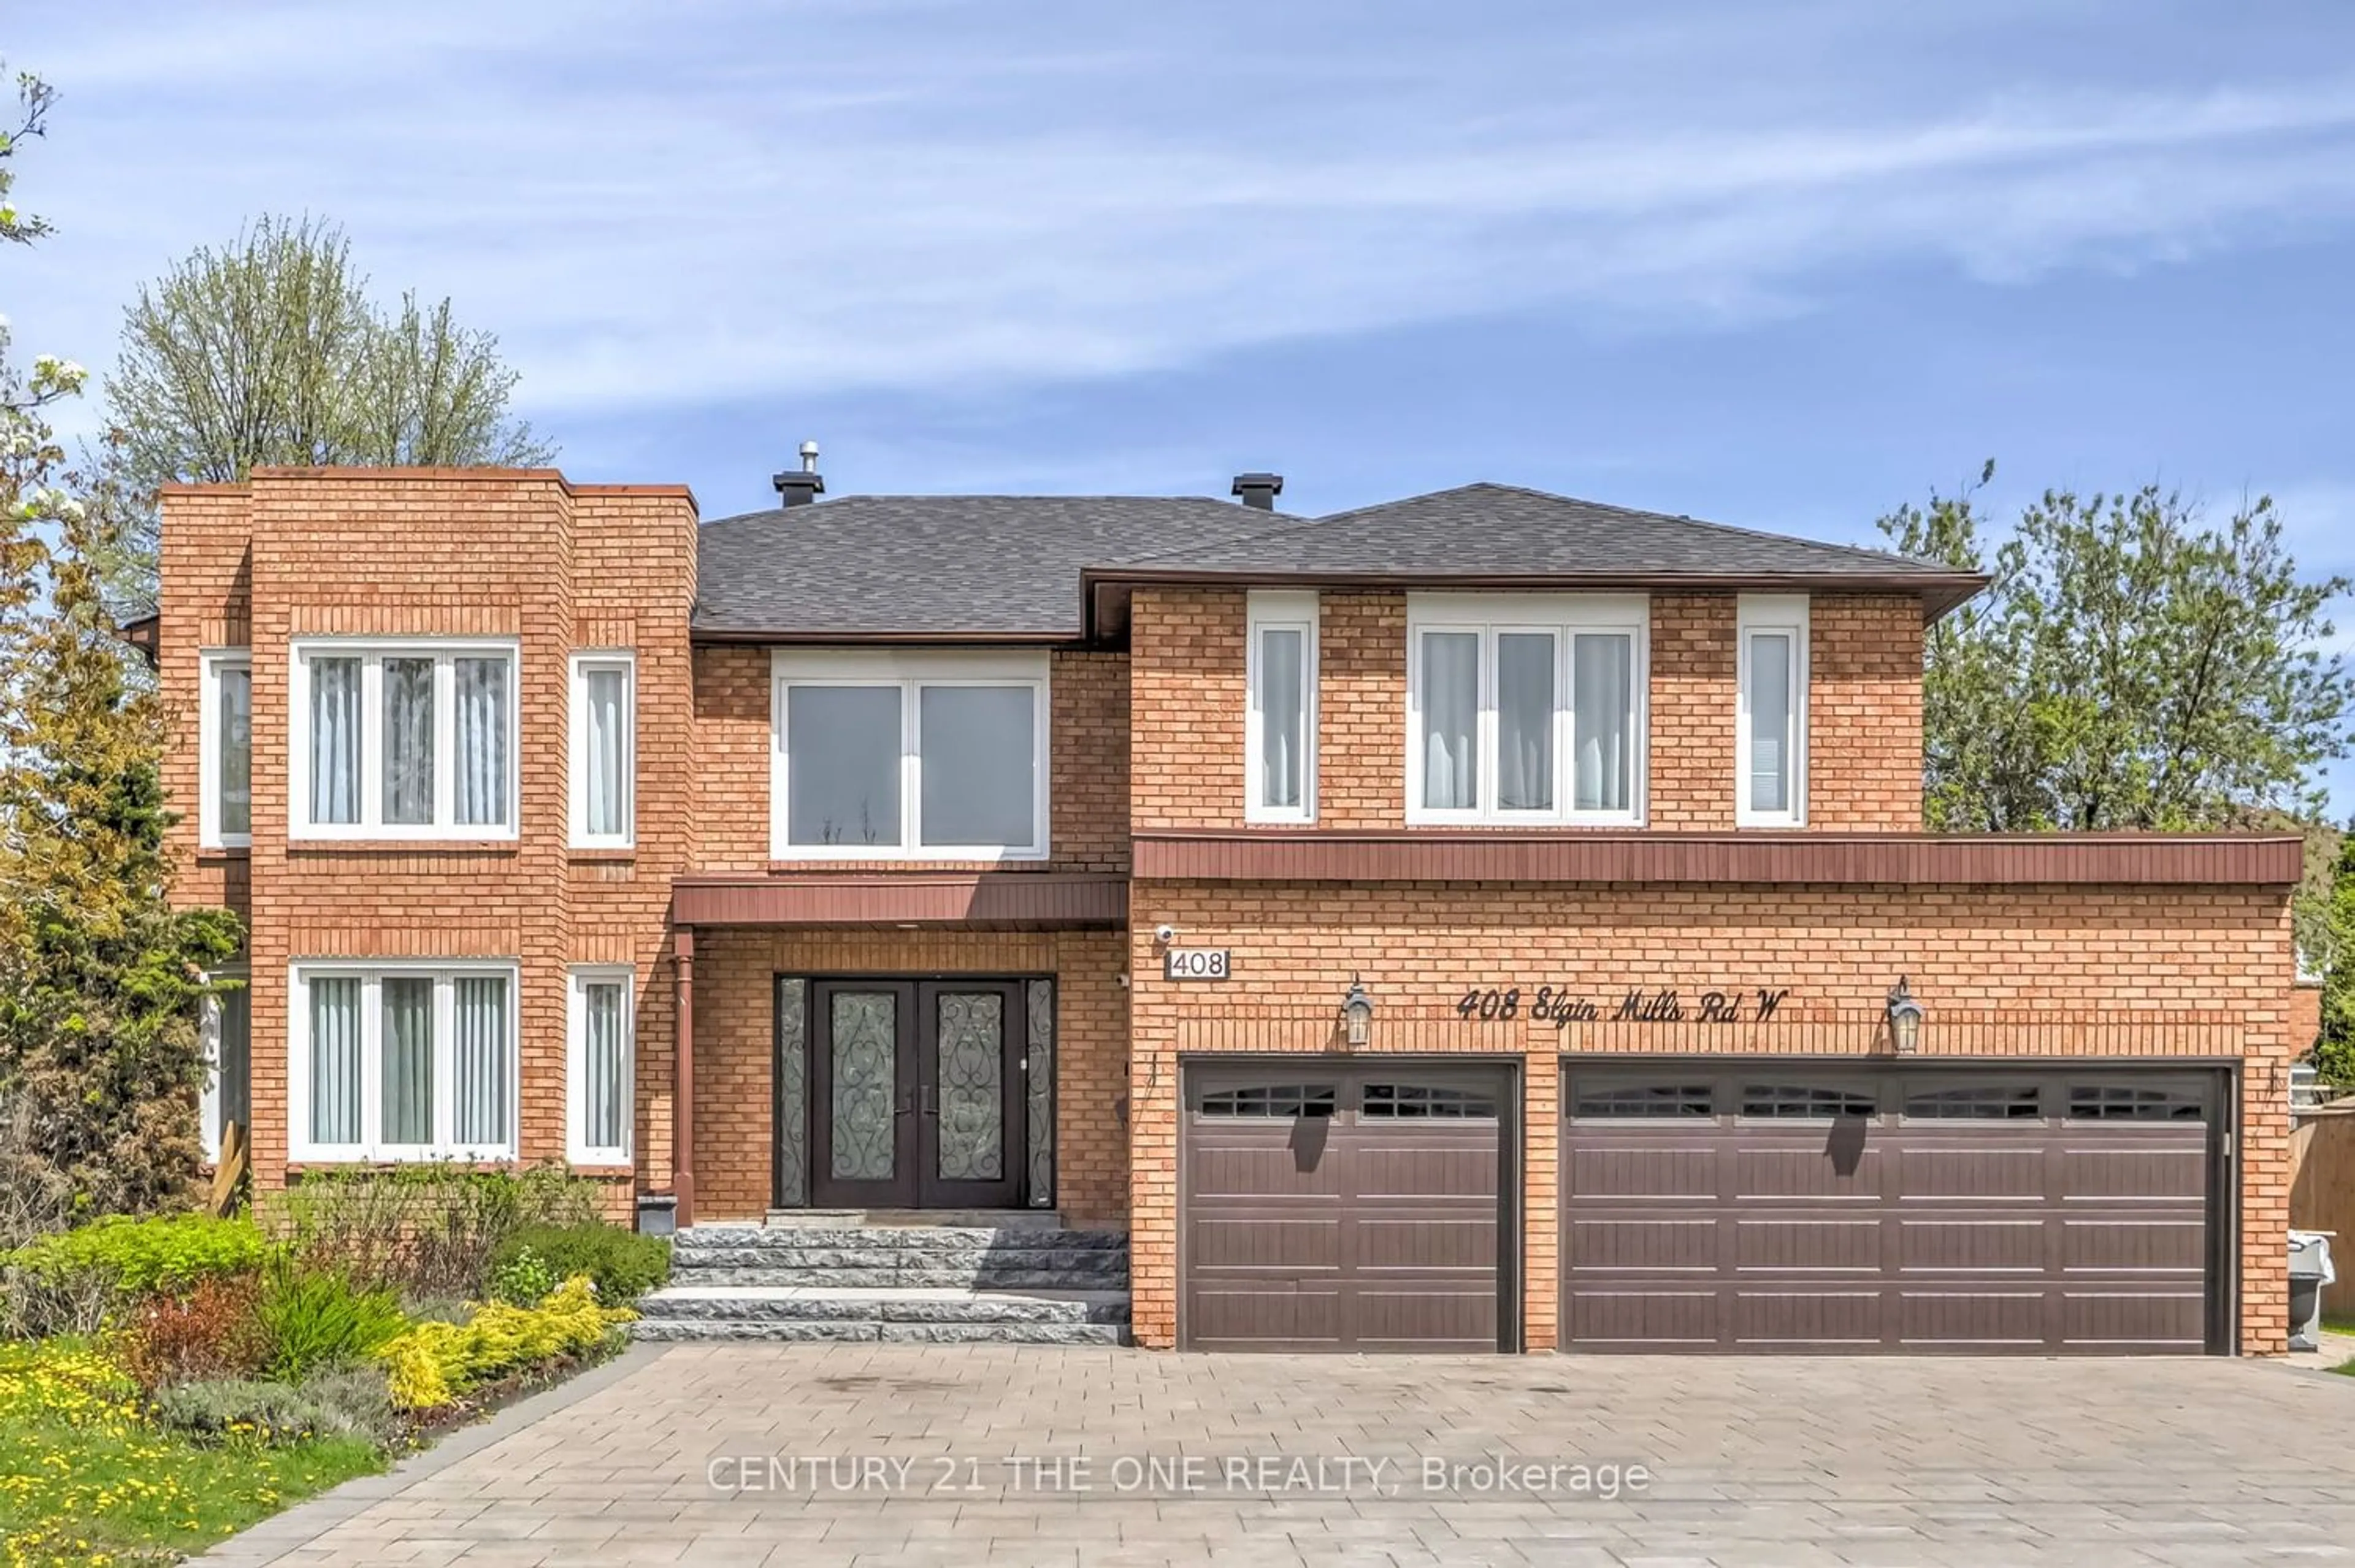 Home with brick exterior material for 408 Elgin Mills Rd, Richmond Hill Ontario L4C 4M2